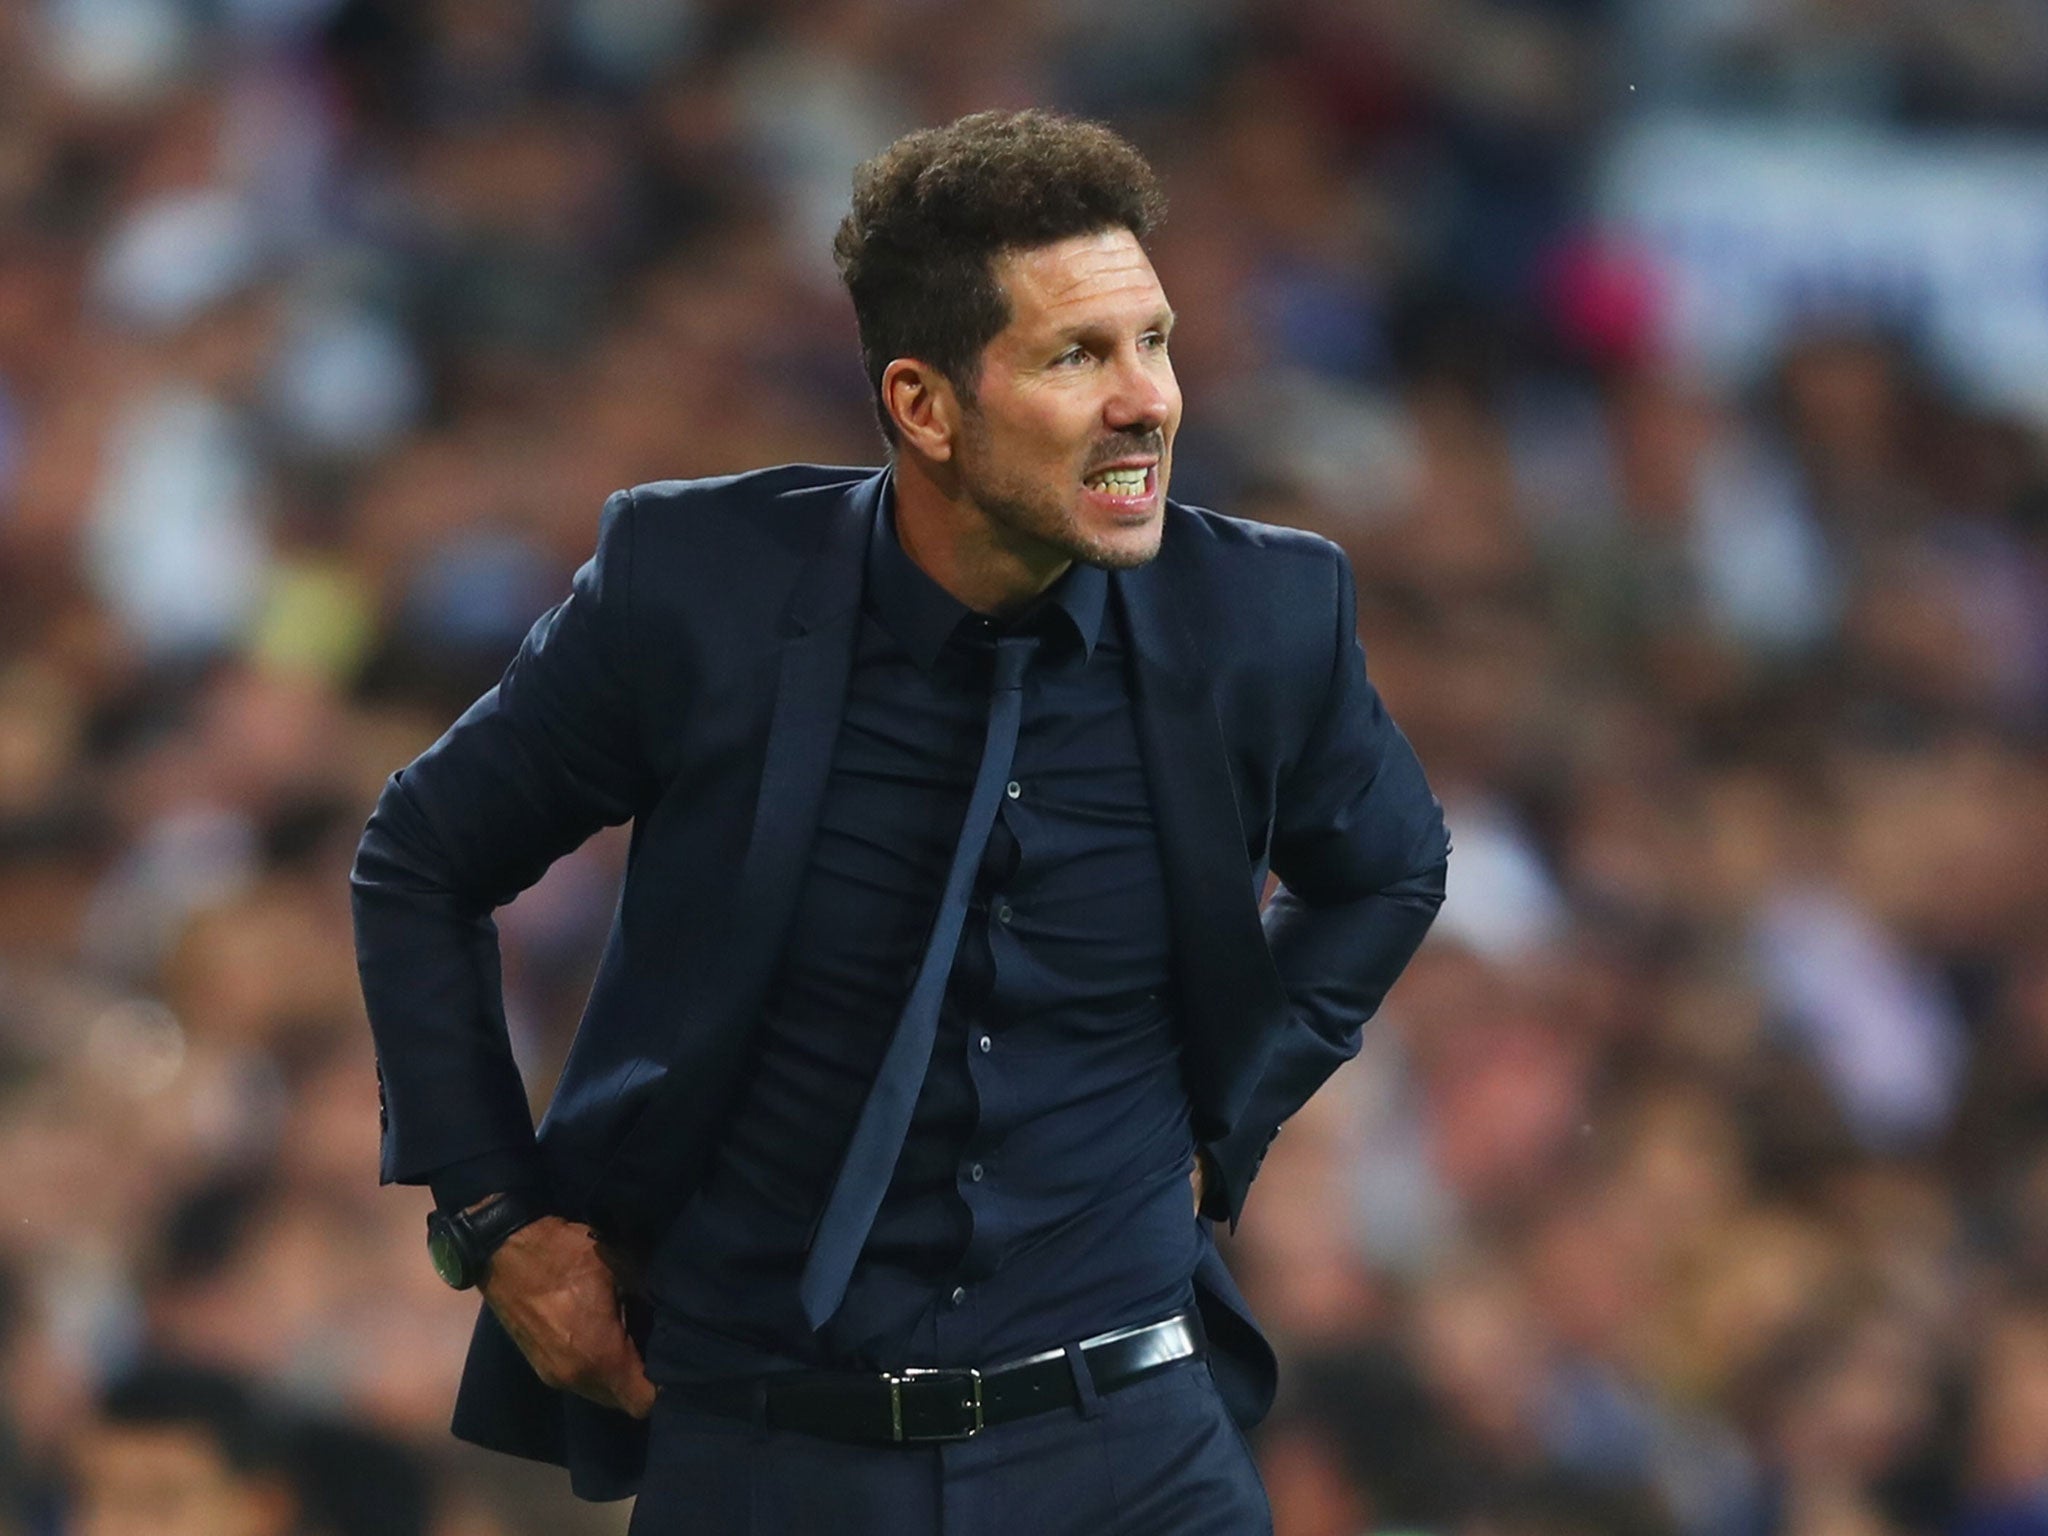 Diego Simeone attempted to strike a defiant tone after his side's defeat